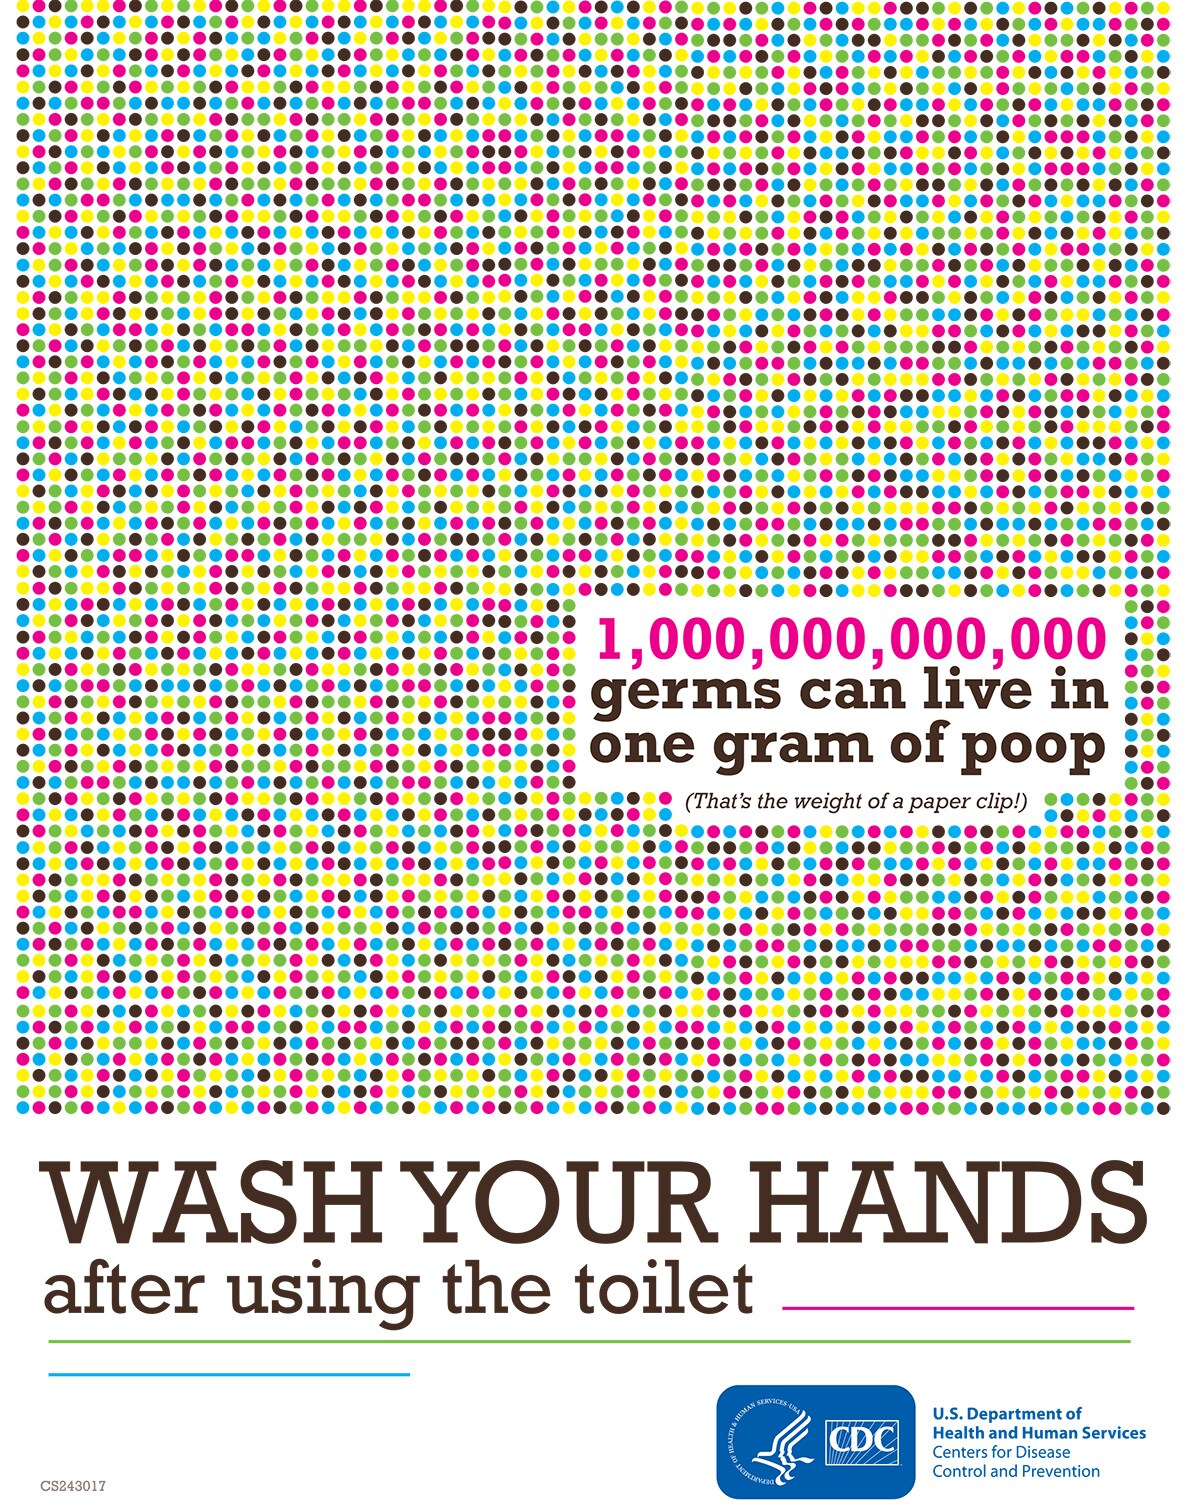 Wash your hands after using the toilet poster